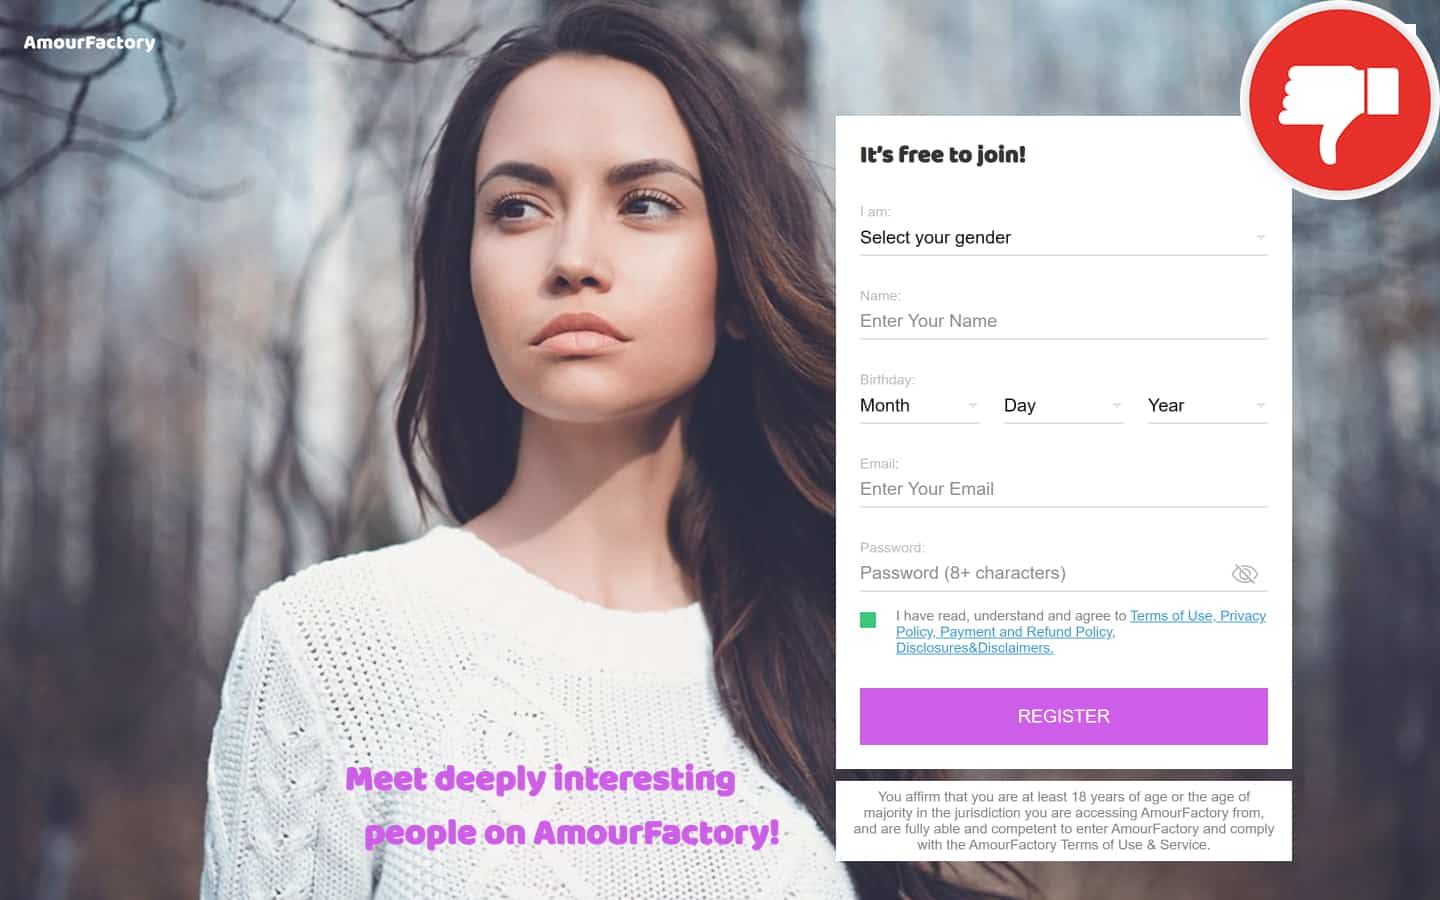 Review AmourFactory.com scam experience